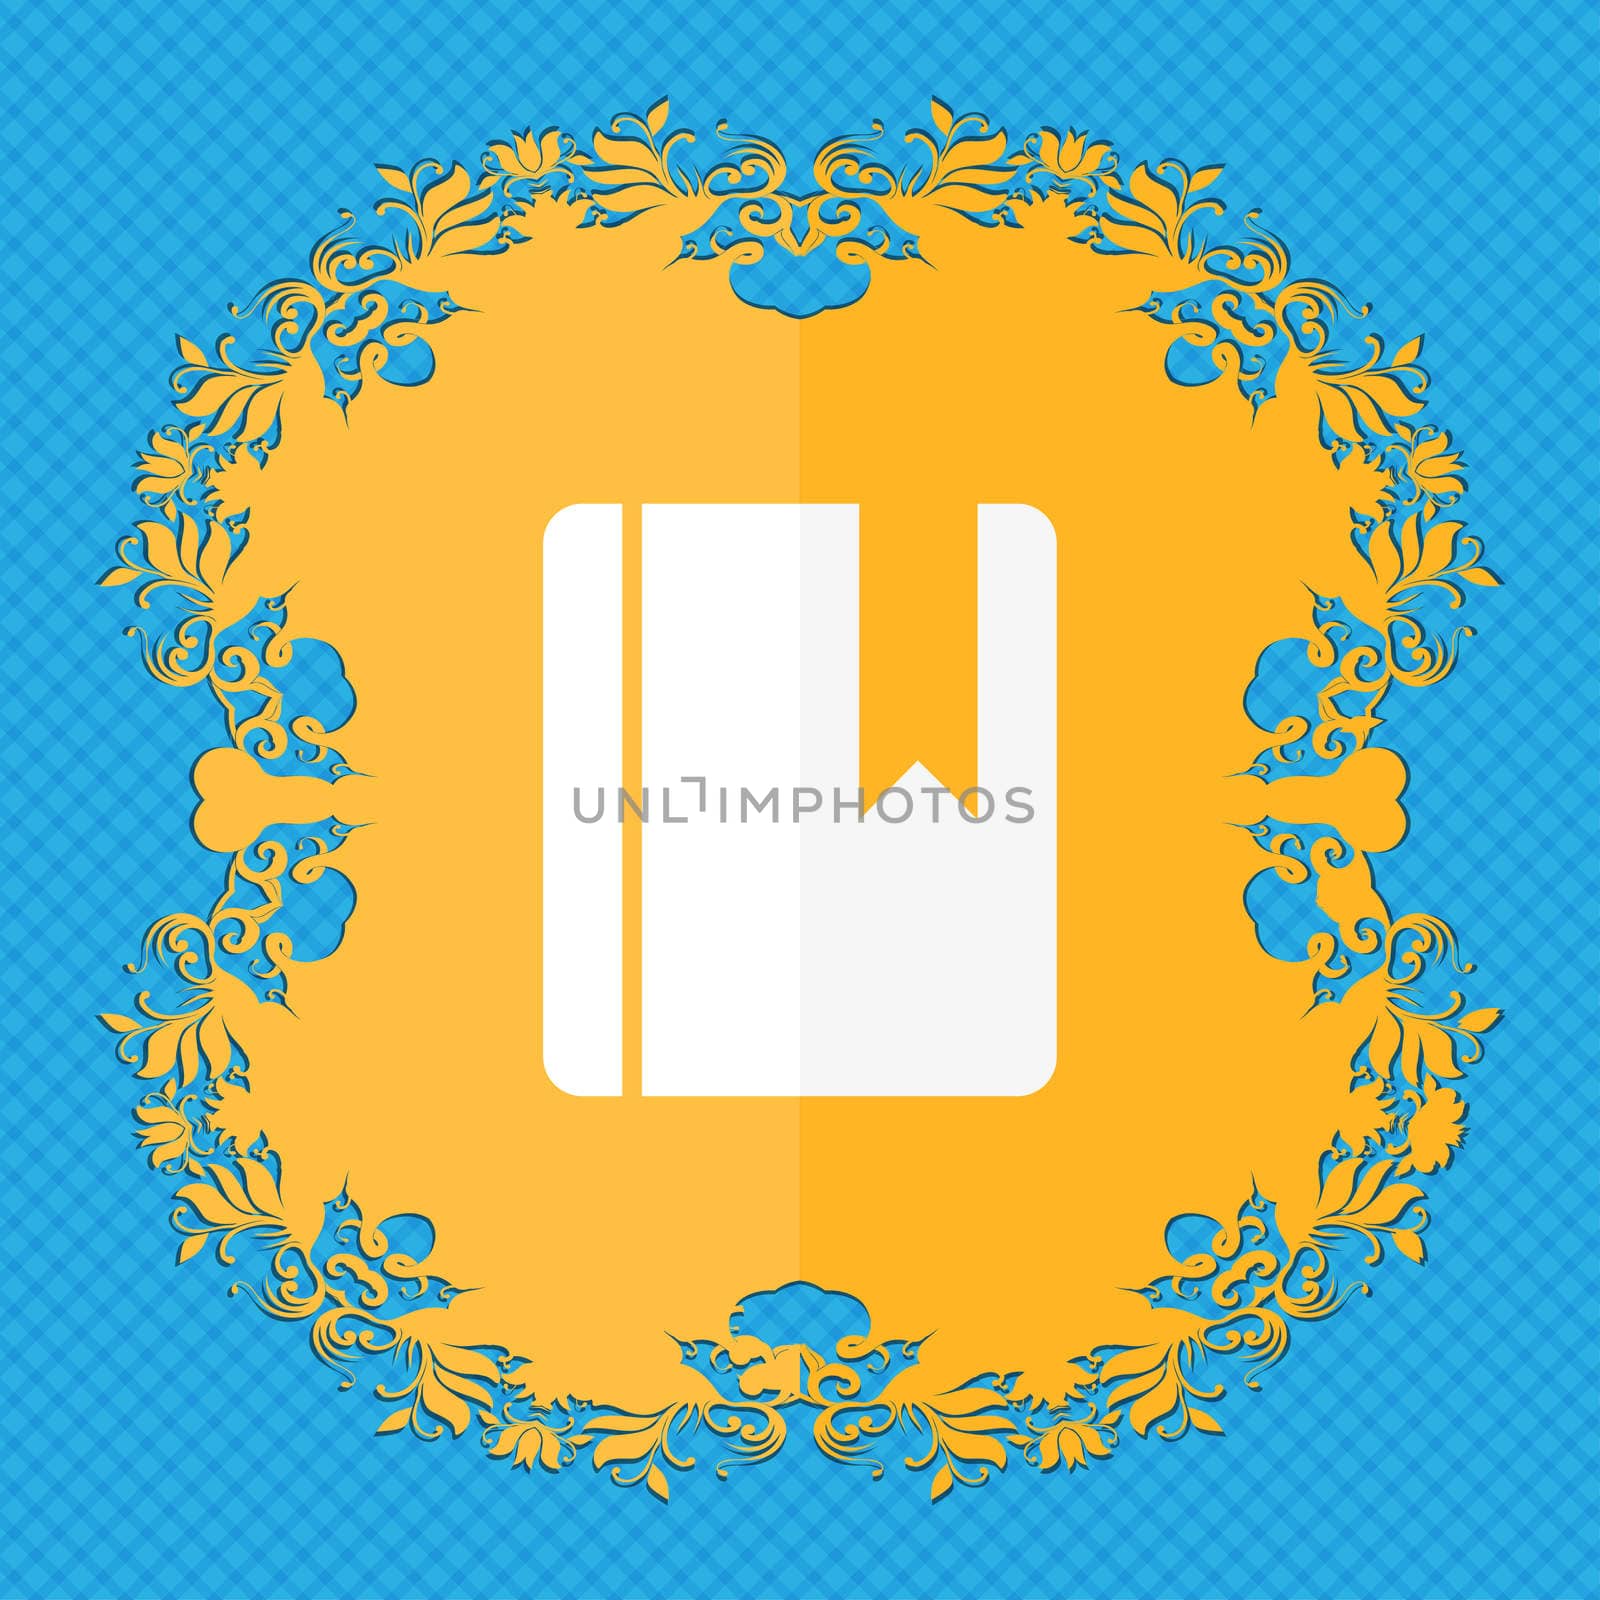 book bookmark . Floral flat design on a blue abstract background with place for your text. illustration